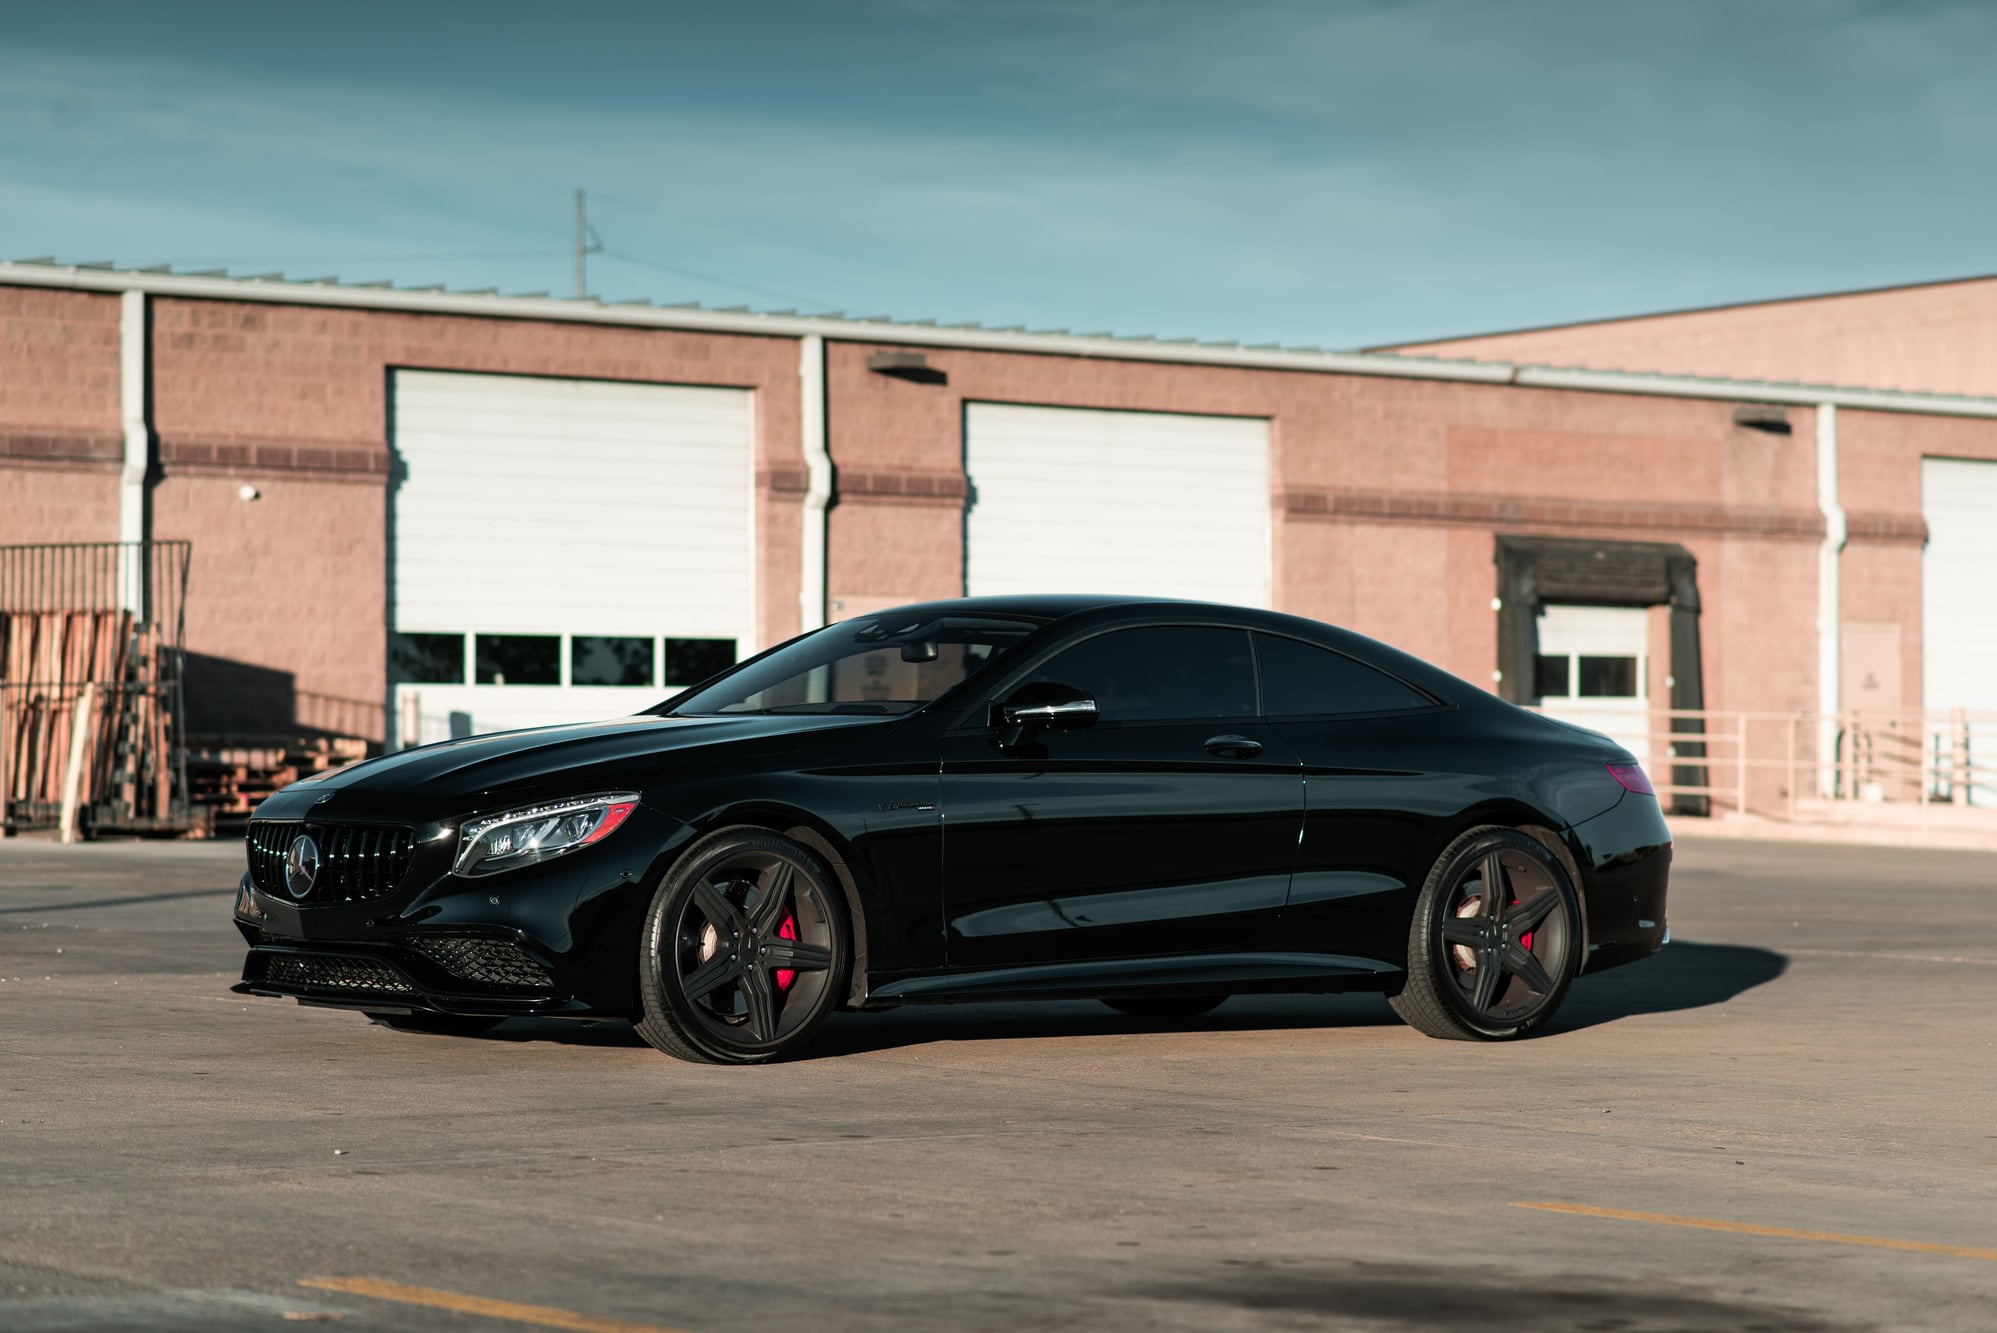 2015 Mercedes-Benz S63 AMG - 2015 Mercedes-Benz S-Class S63 AMG Coupe - Used - VIN WDDXJ7JB6FA005684 - 34,000 Miles - 8 cyl - AWD - Automatic - Coupe - Black - Denver, CO 80229, United States